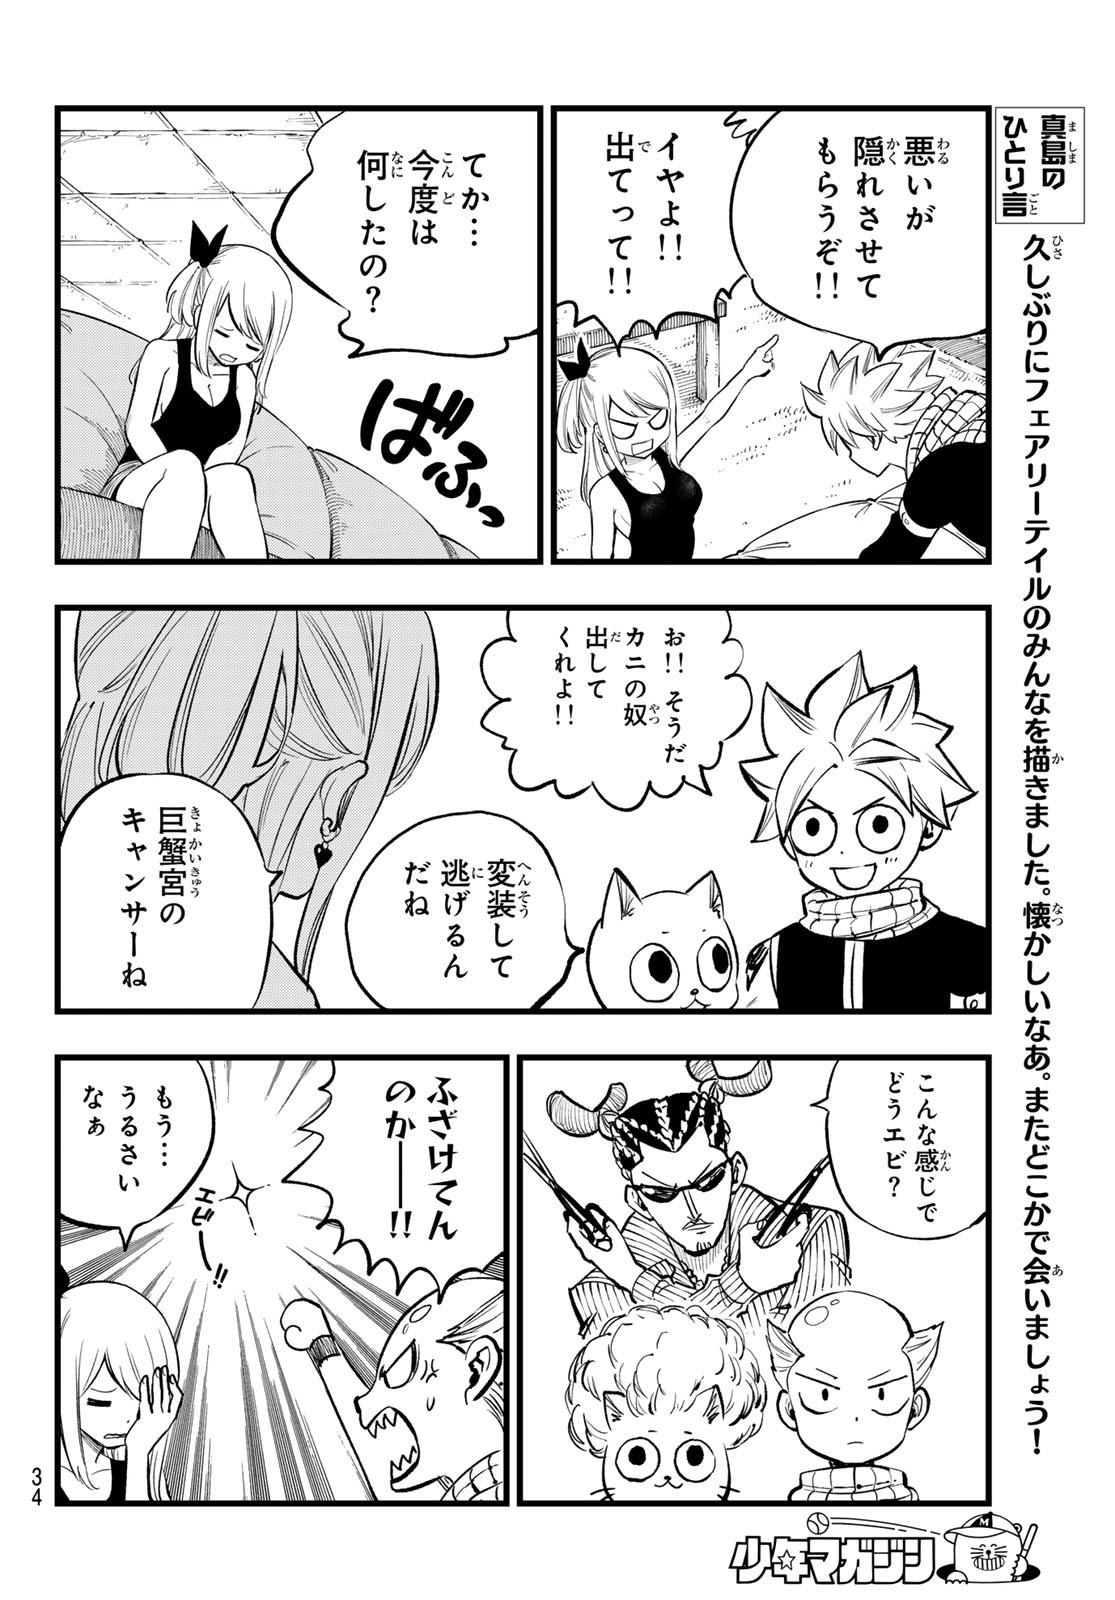 Weekly Shōnen Magazine - 週刊少年マガジン - Chapter 2024-31 - Page 33